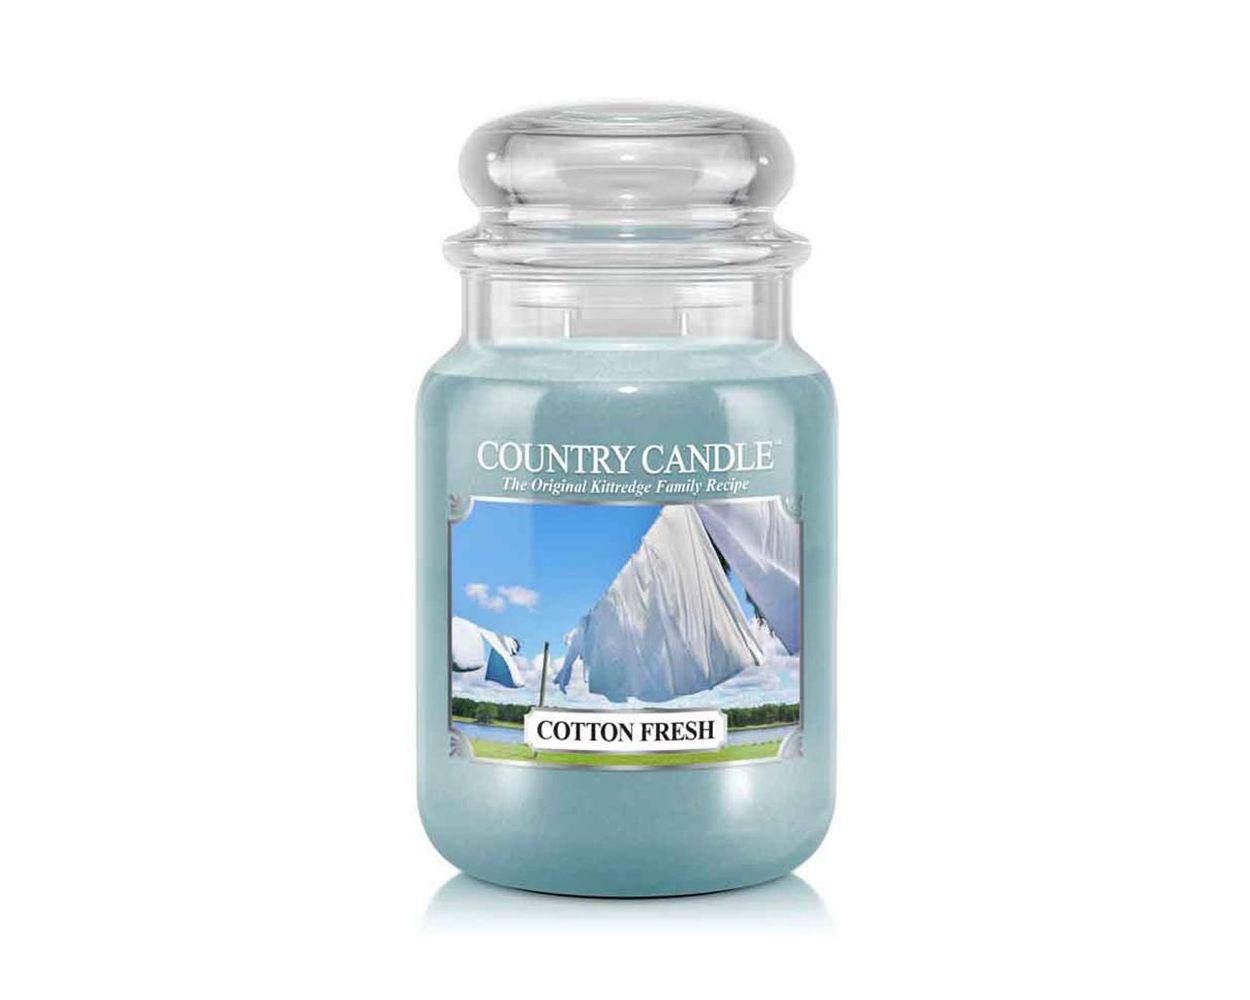 Cotton Flowers from Country Candle